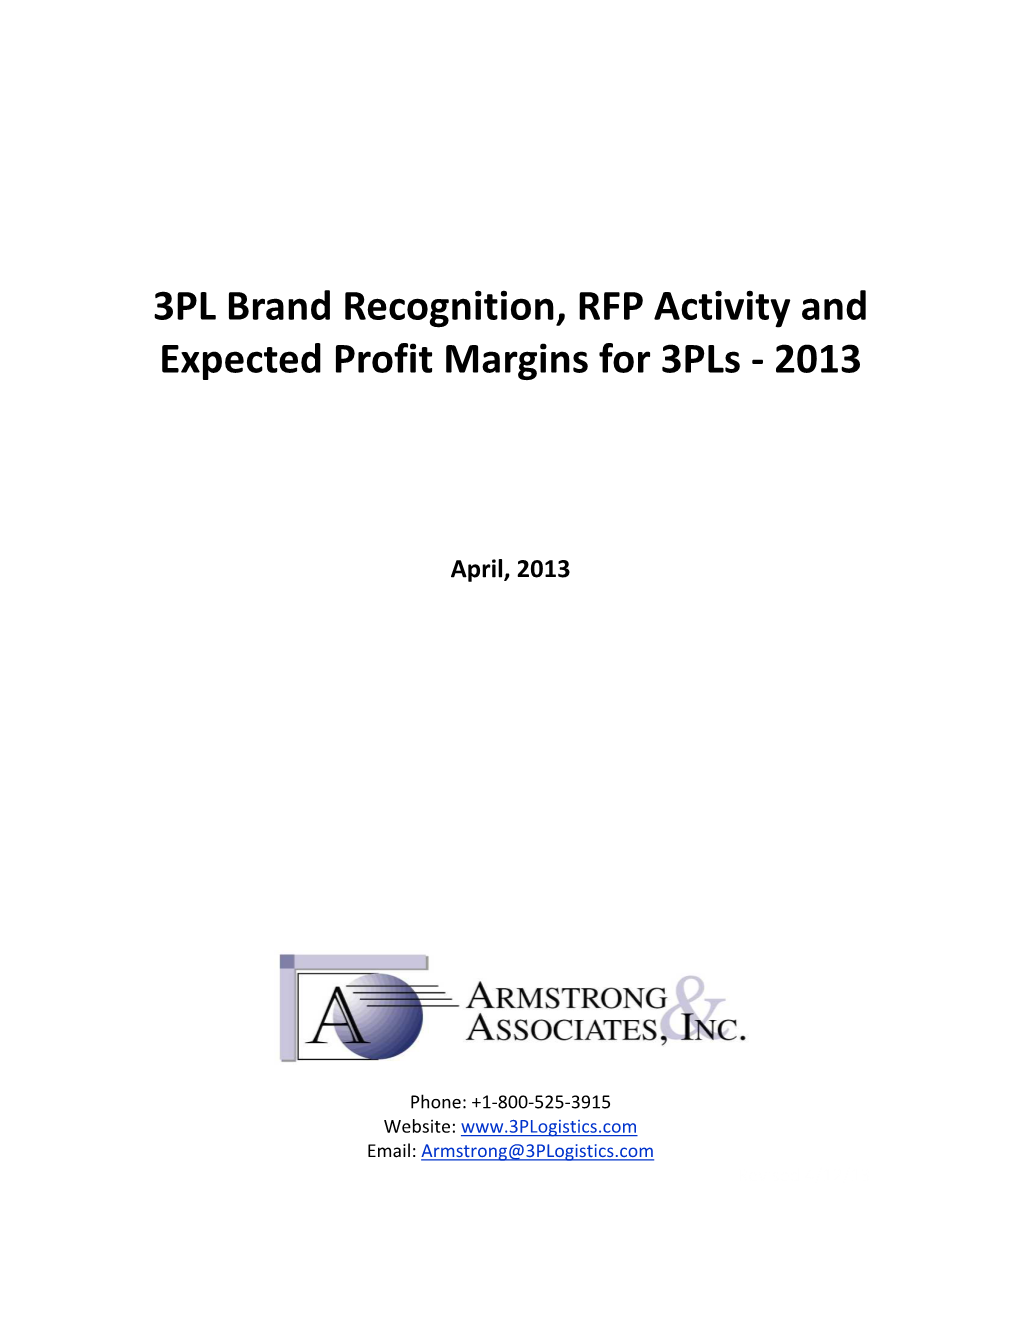 3PL Brand Recognition, RFP Activity and Expected Profit Margins for 3Pls ‐ 2013